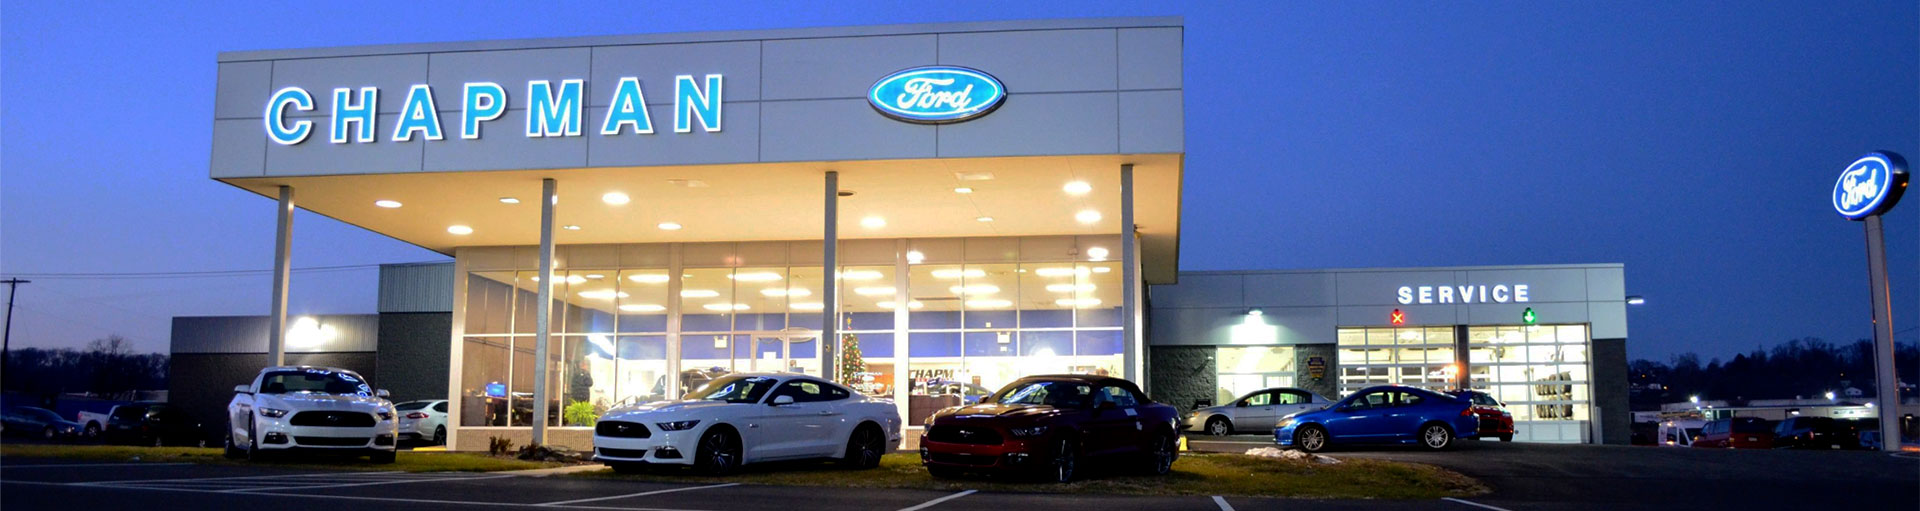 Chapman Ford Service Department